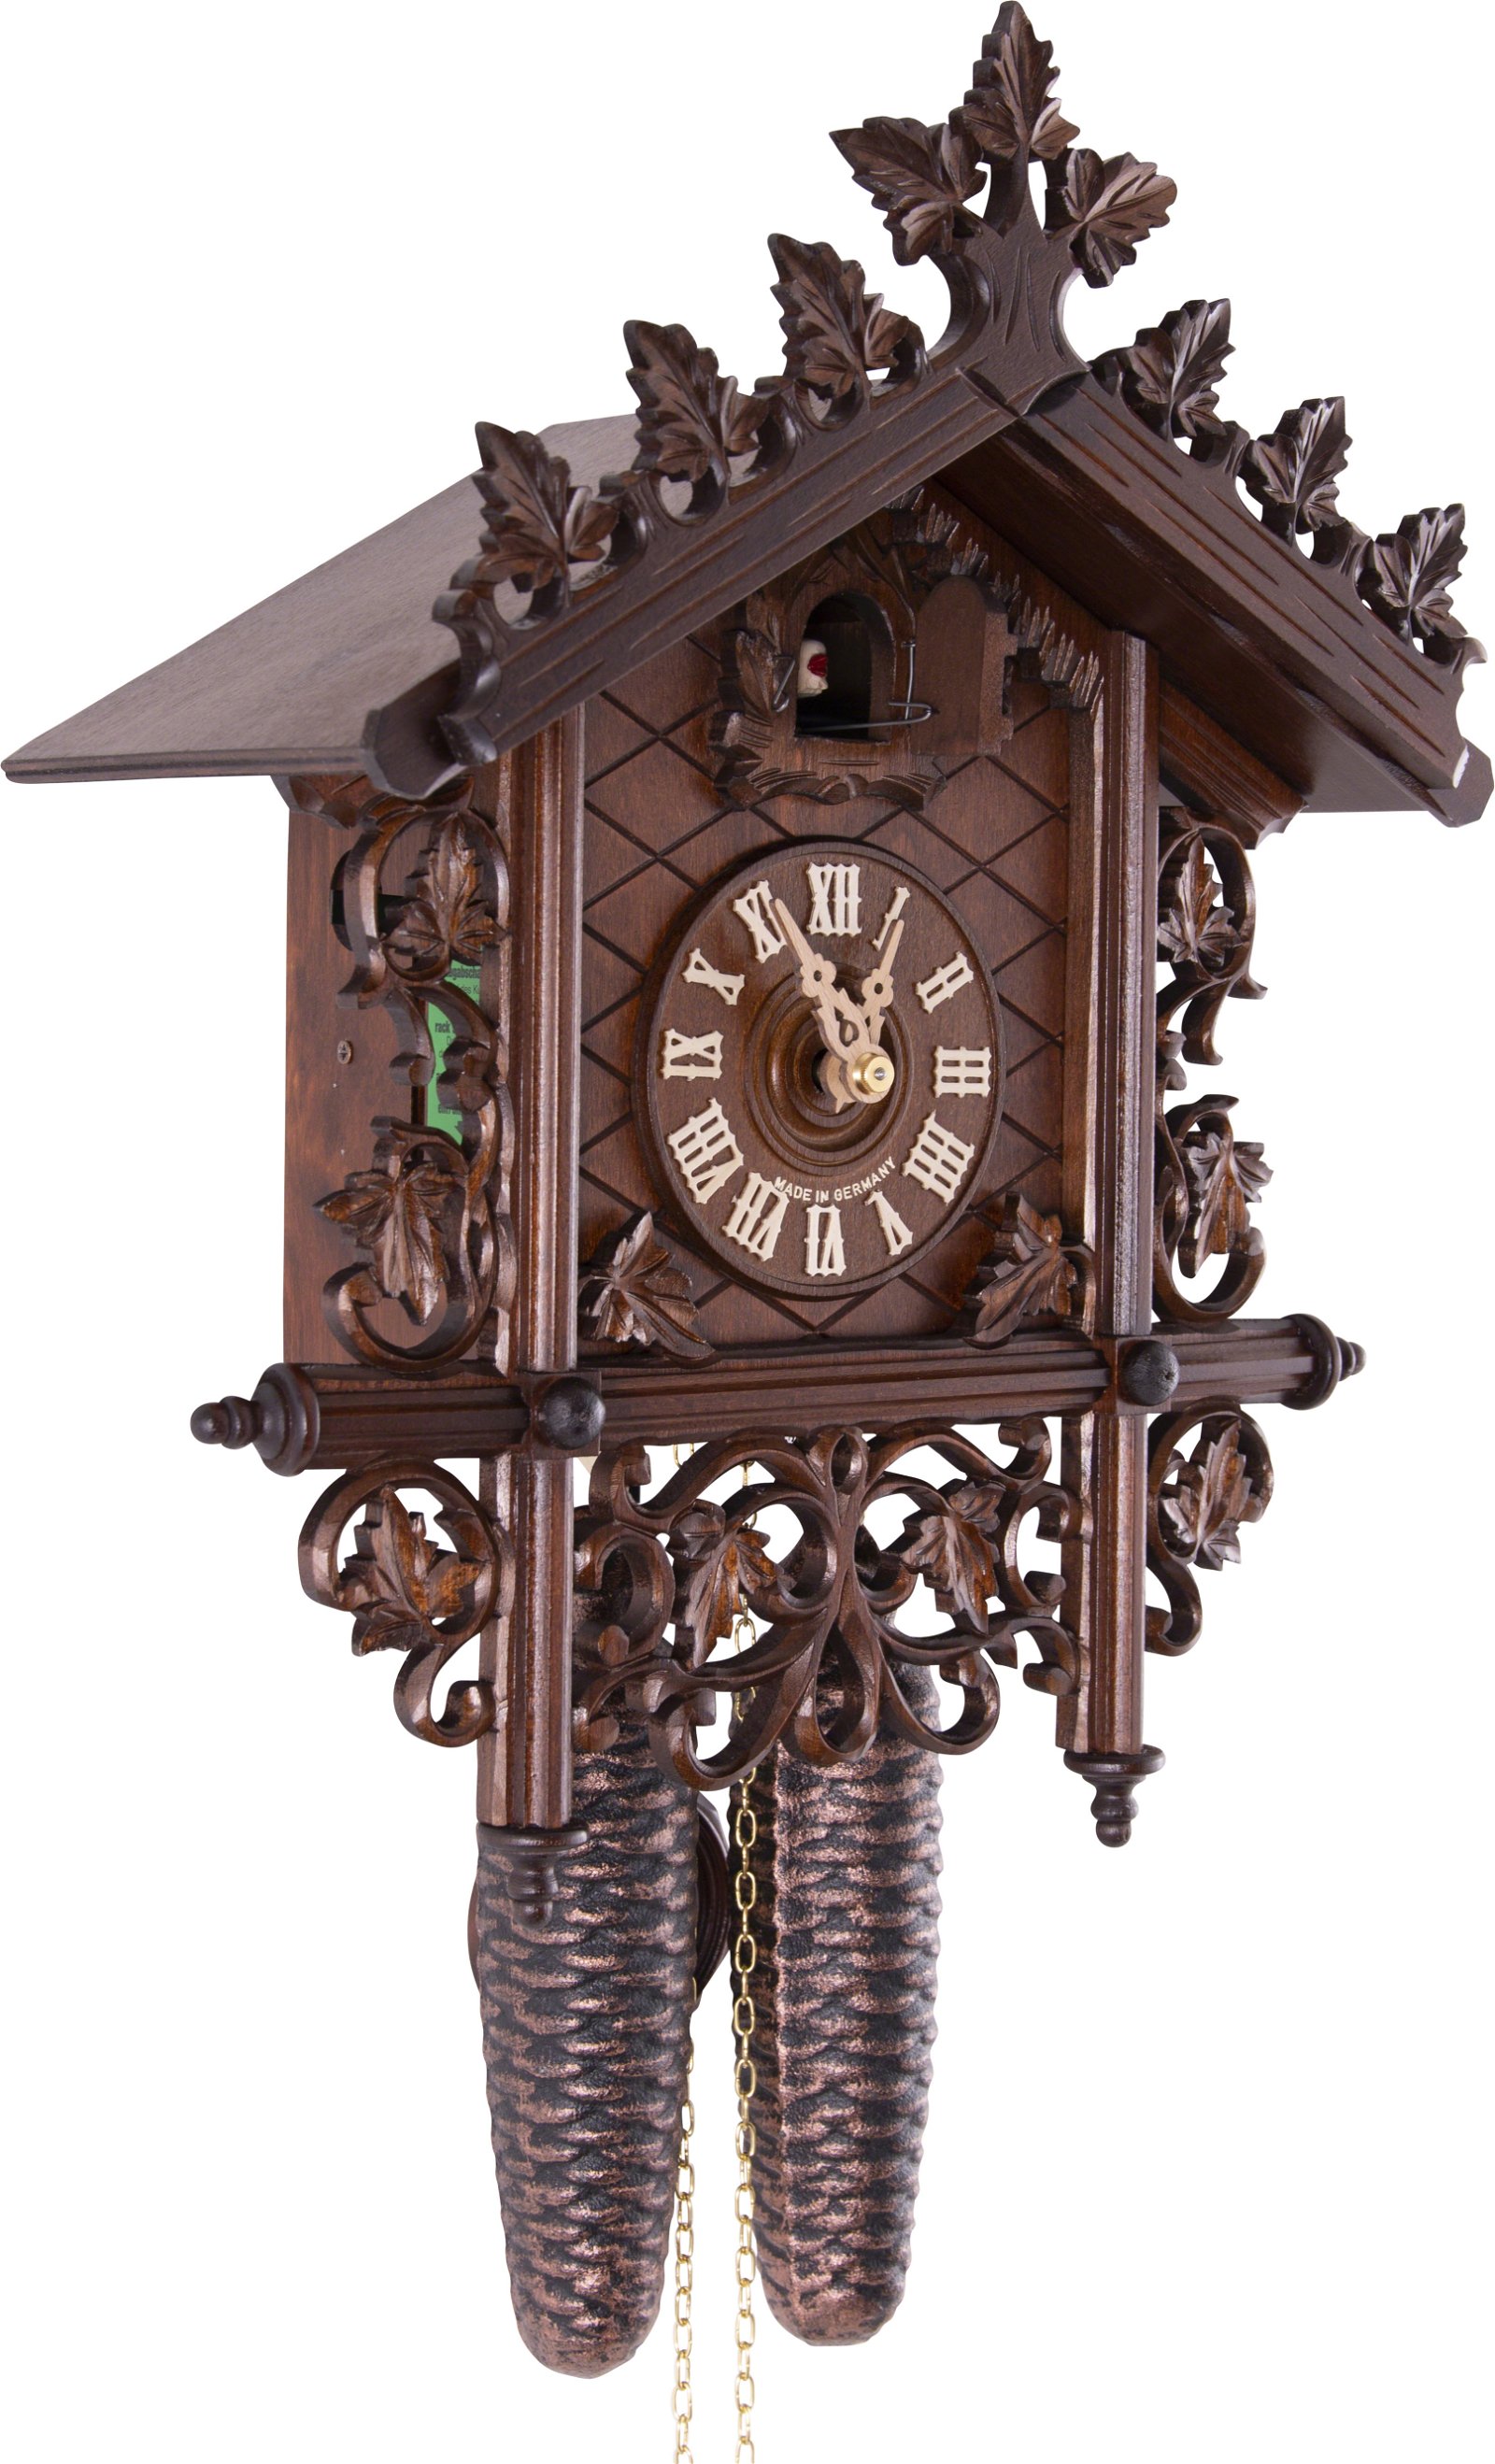 Antique Replica Clock 8 Day Movement 36cm by Hekas